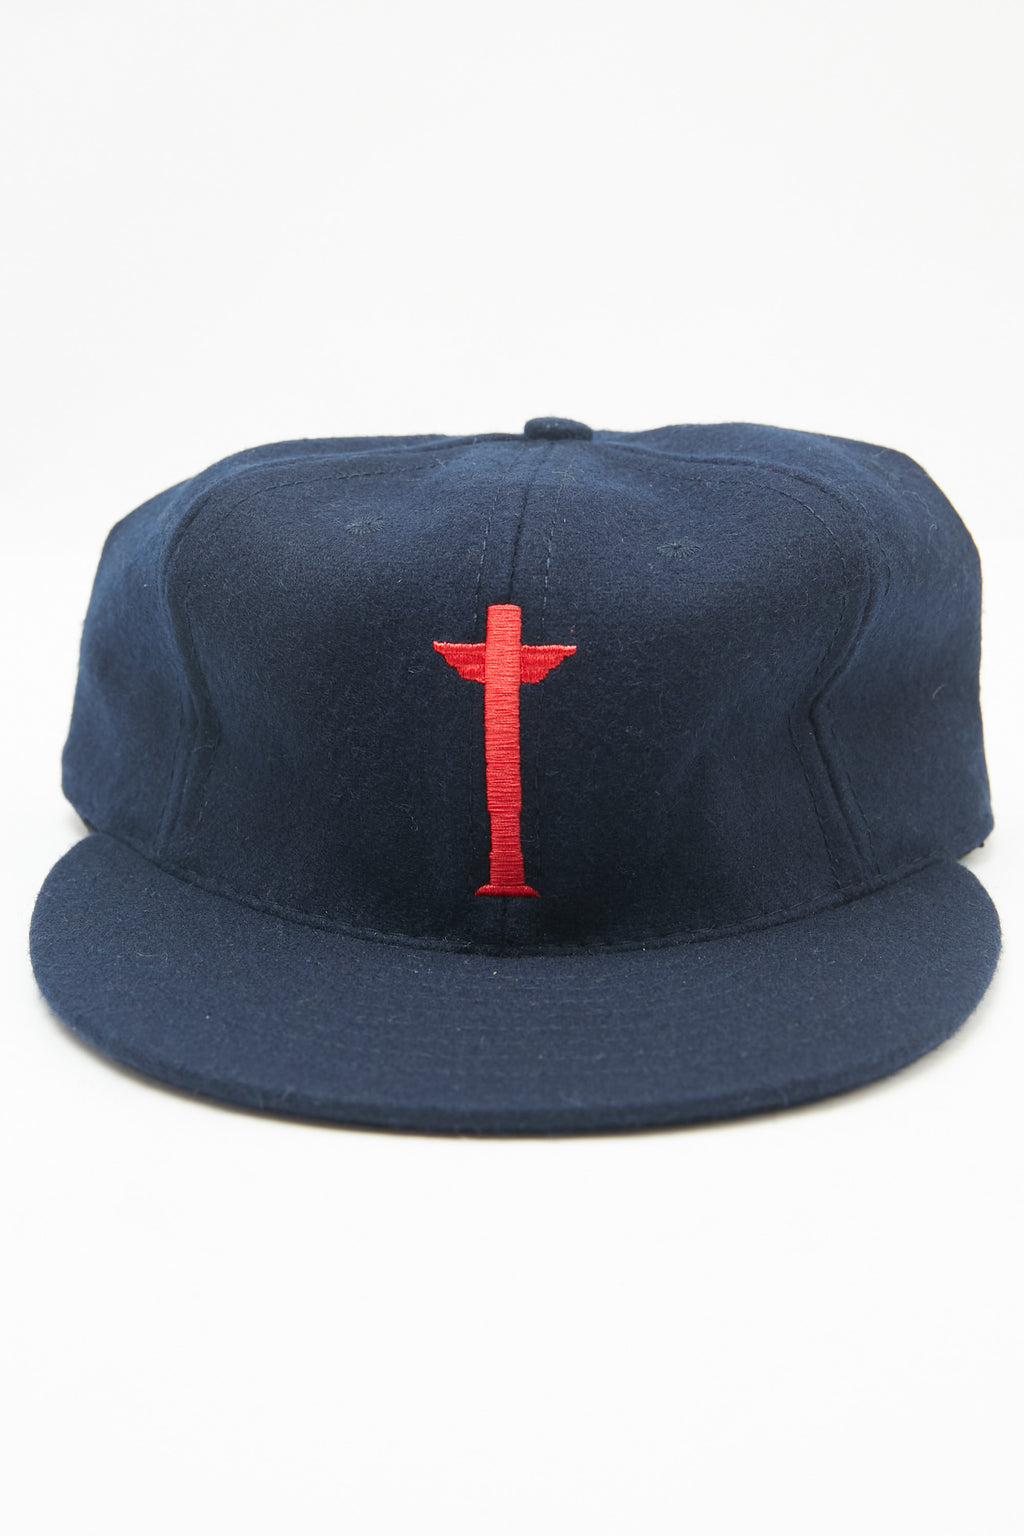 Ebbets x Totem Brand Co. Cap - Navy/Red Wool - EXCLUSIVE